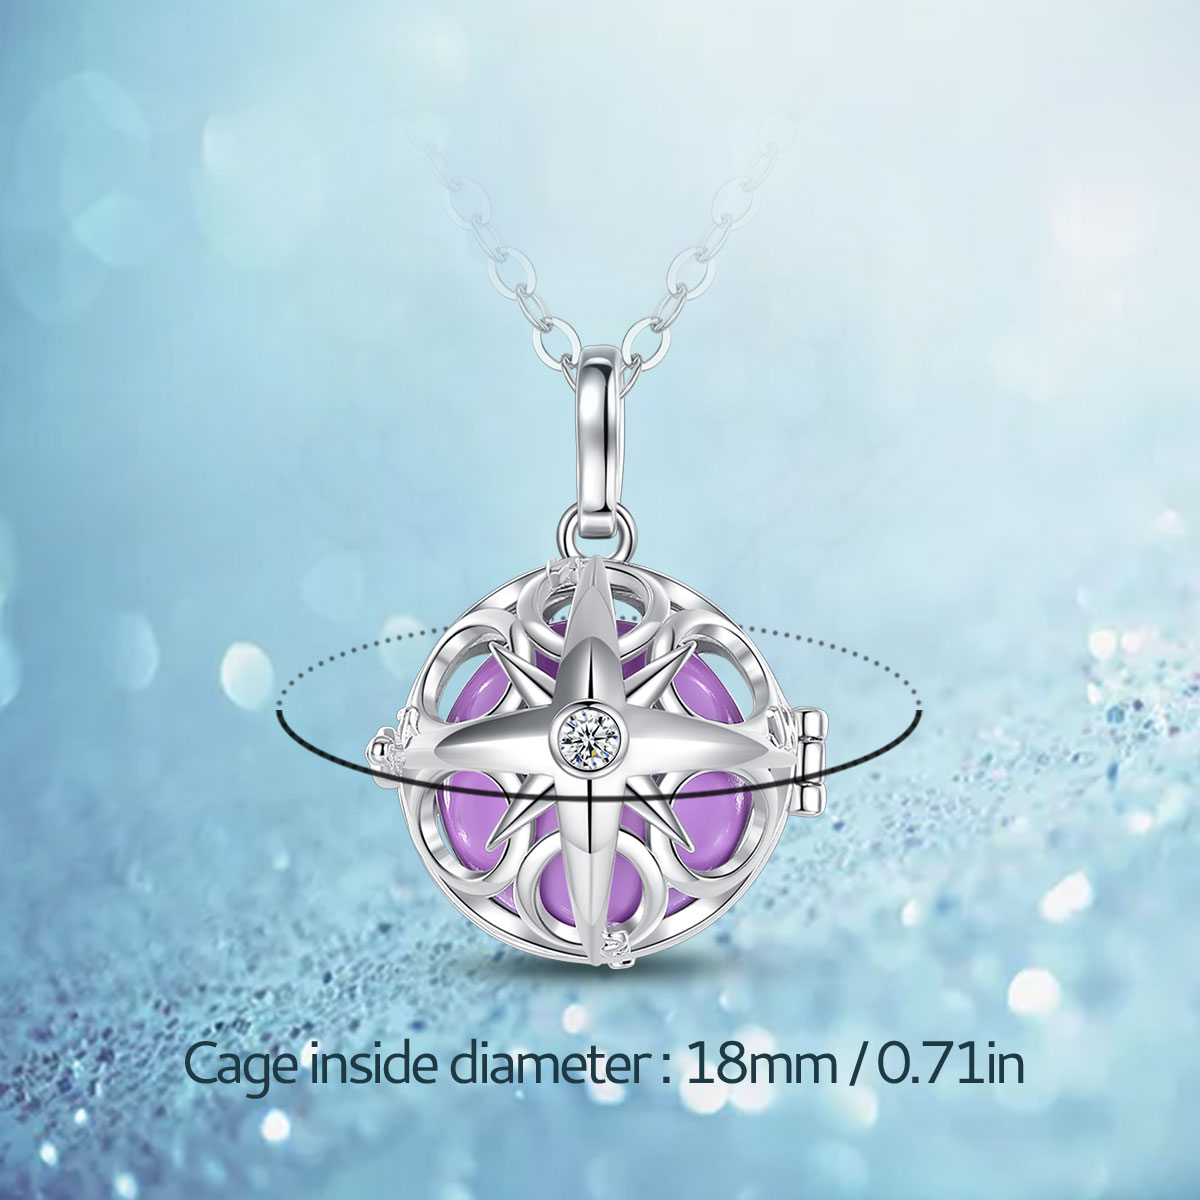 Merryshine Jewelry Polaris Design Angel Chime Caller Bell Mexican Bola Harmony Ball Cage Necklace